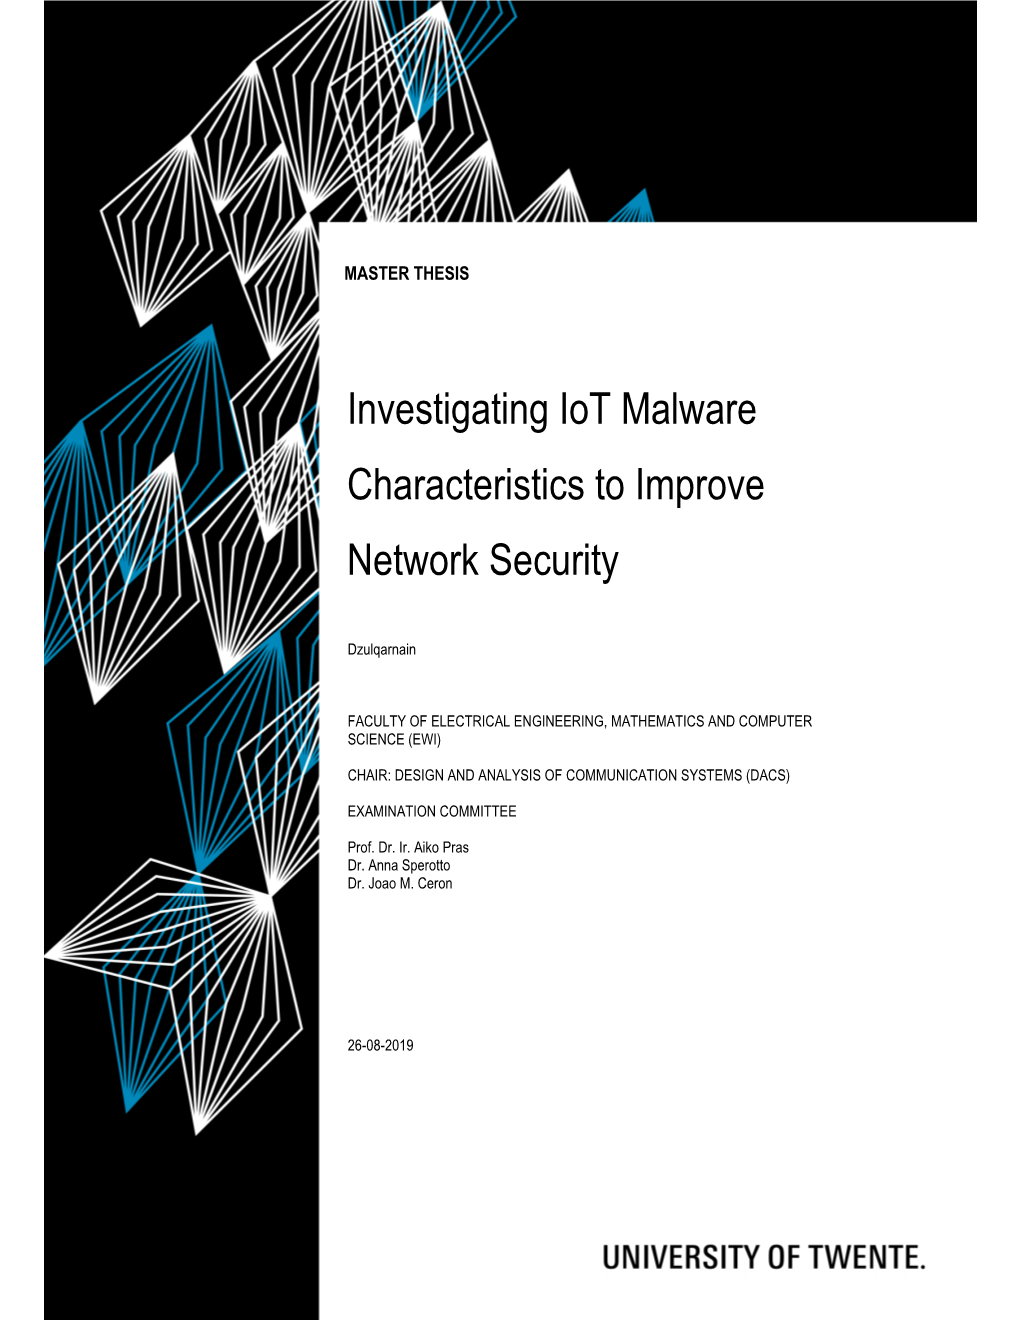 Investigating Iot Malware Characteristics to Improve Network Security